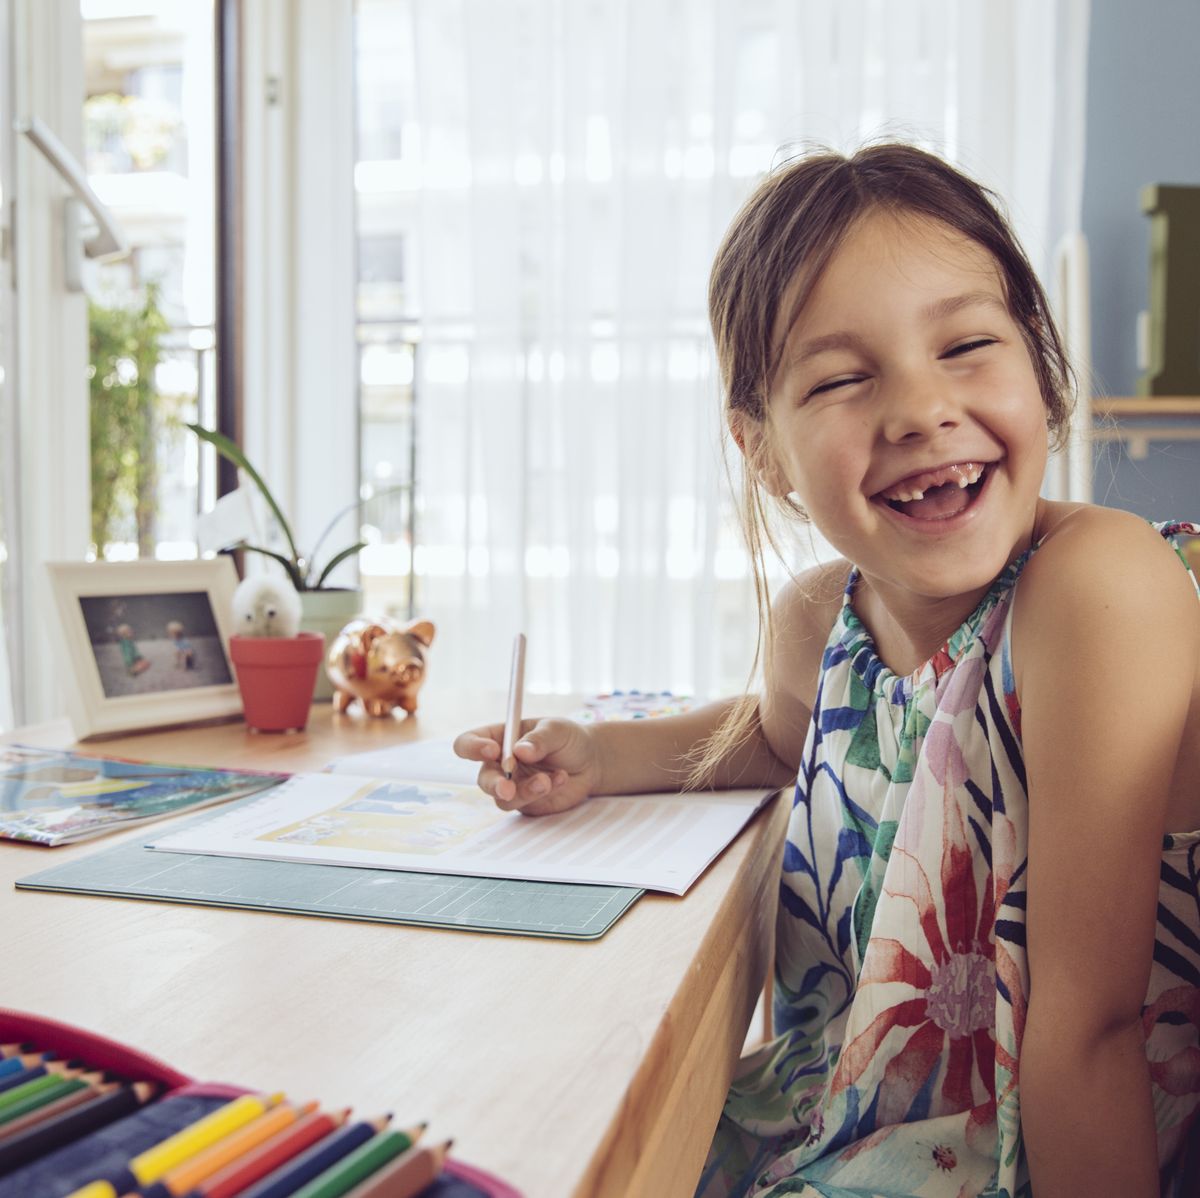 https://hips.hearstapps.com/hmg-prod/images/happy-girl-doing-her-schoolwork-at-home-royalty-free-image-1627678308.jpg?crop=0.668xw:1.00xh;0.332xw,0&resize=1200:*